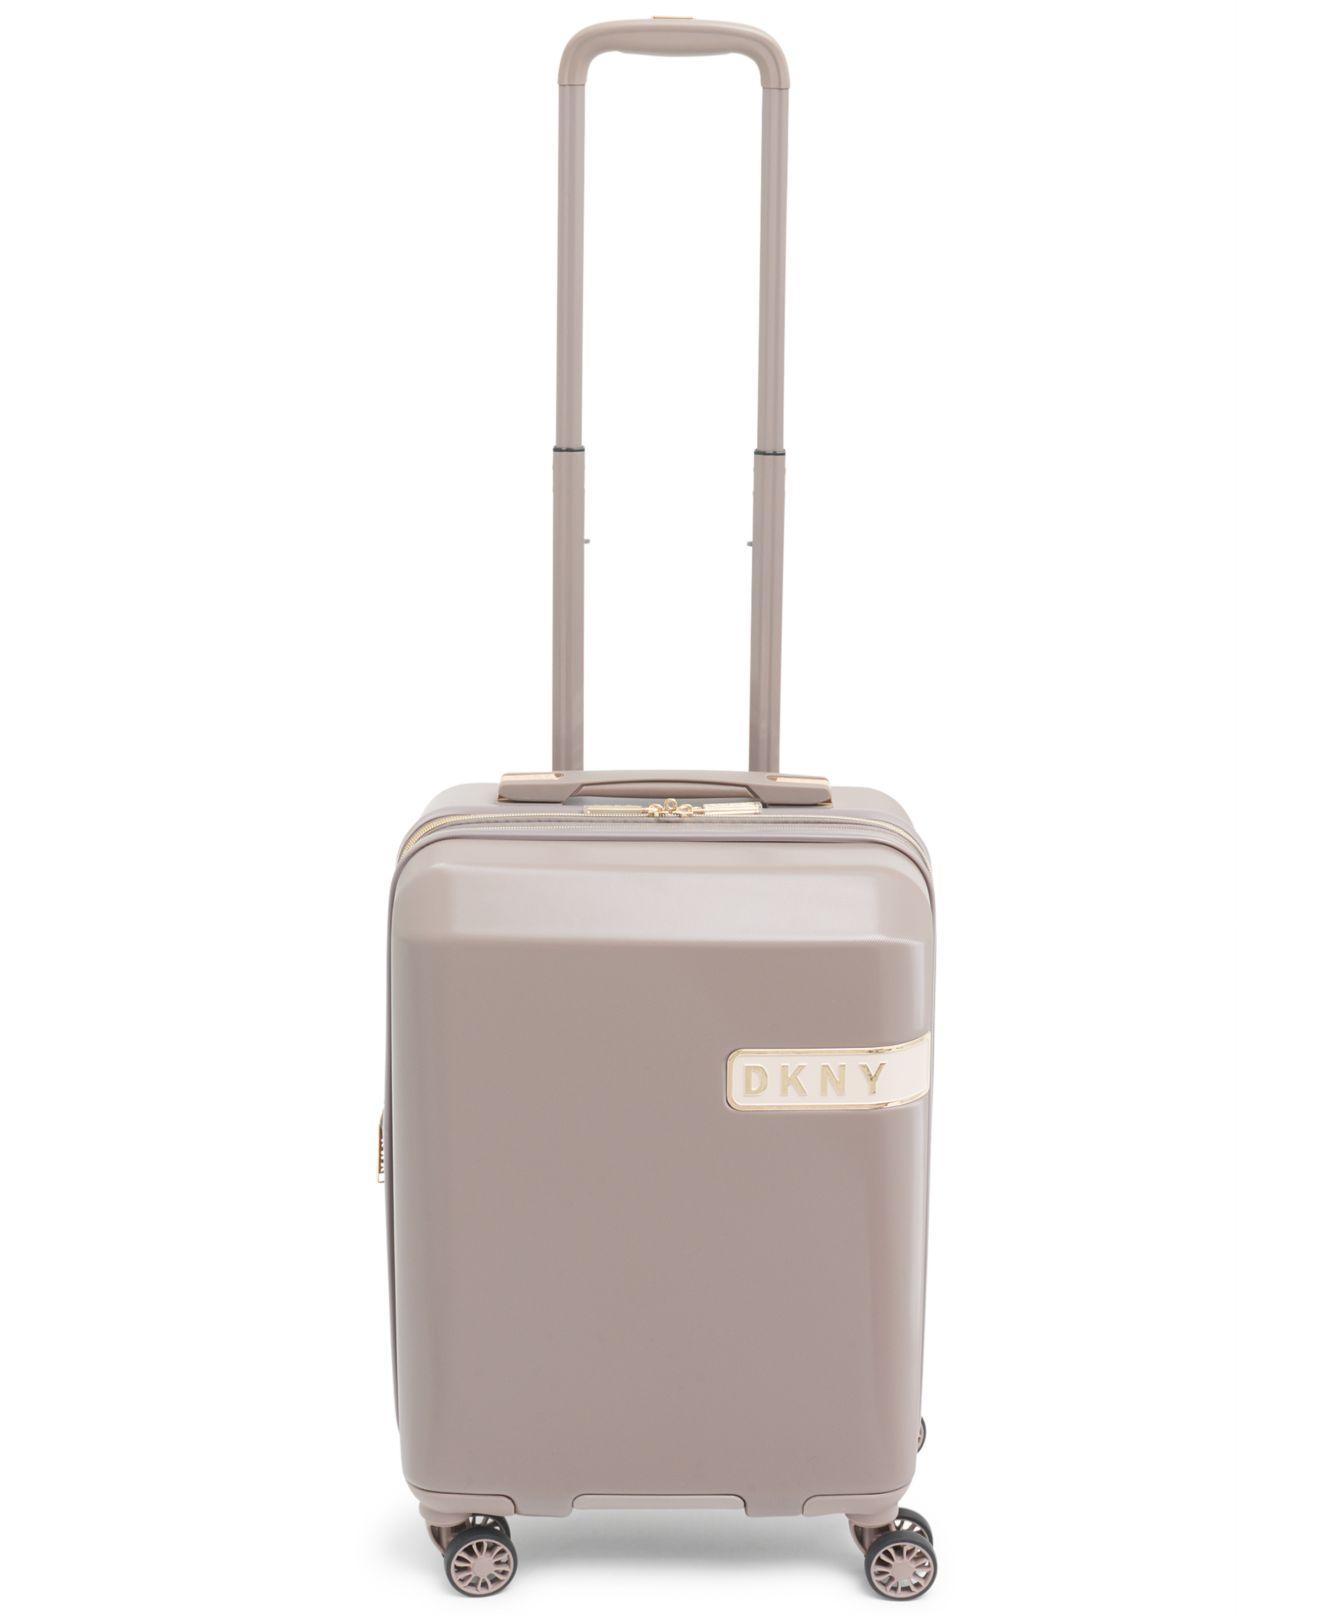 DKNY Rapture 20" Hardside Carry-on Spinner Suitcase | Lyst